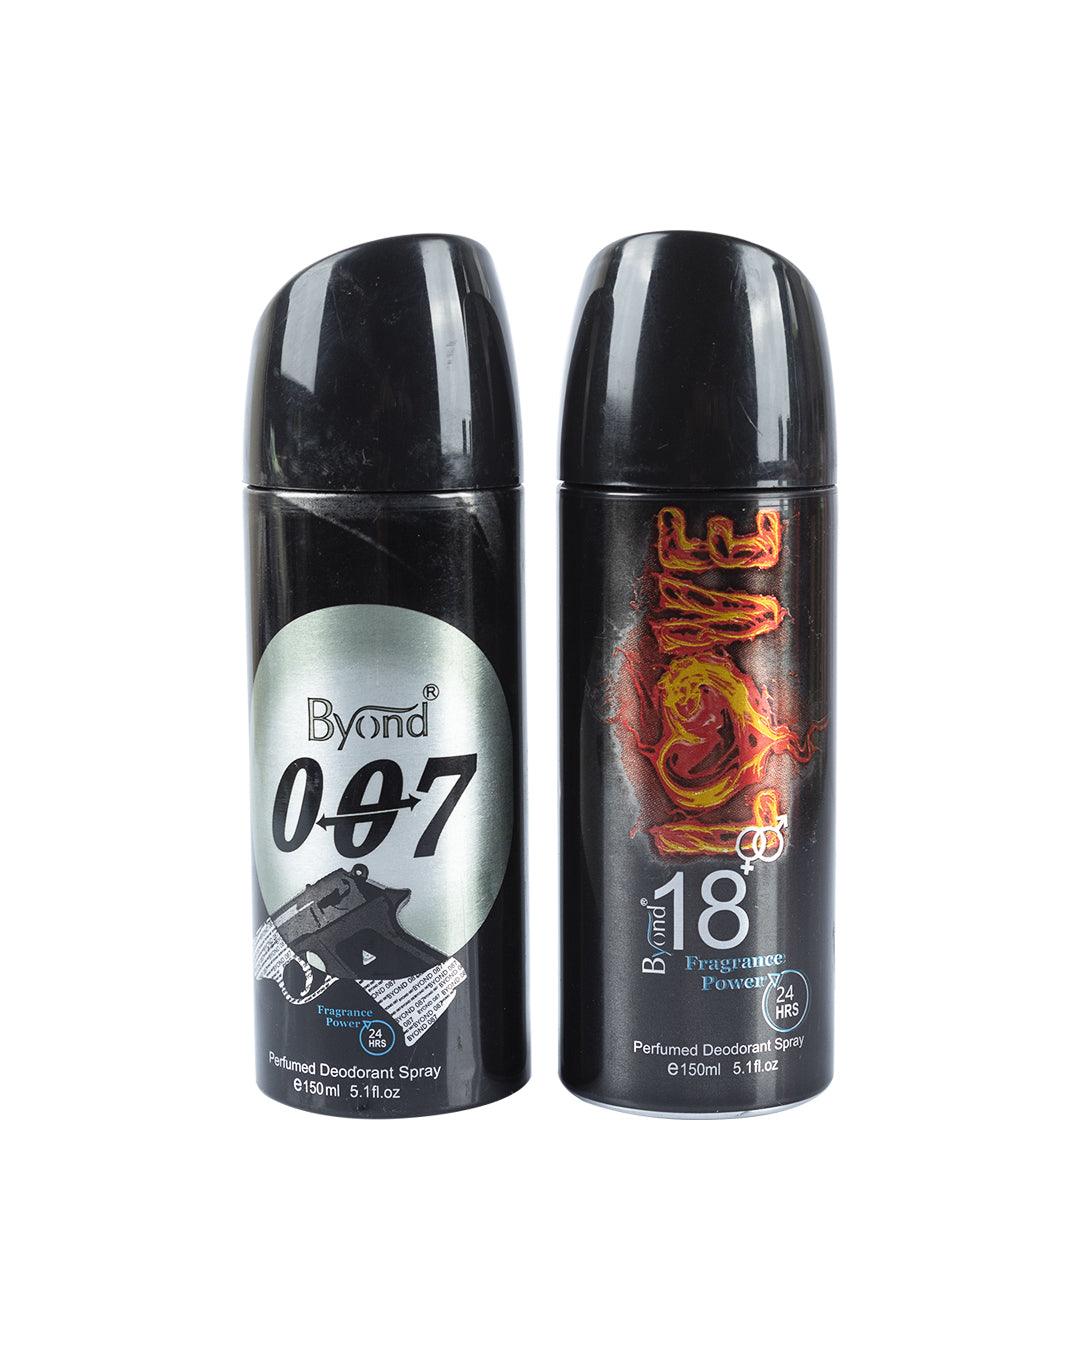 Byond 007 Gas Deo + I Love (18) Deo (Pack Of 2, Each 150 mL) - MARKET 99